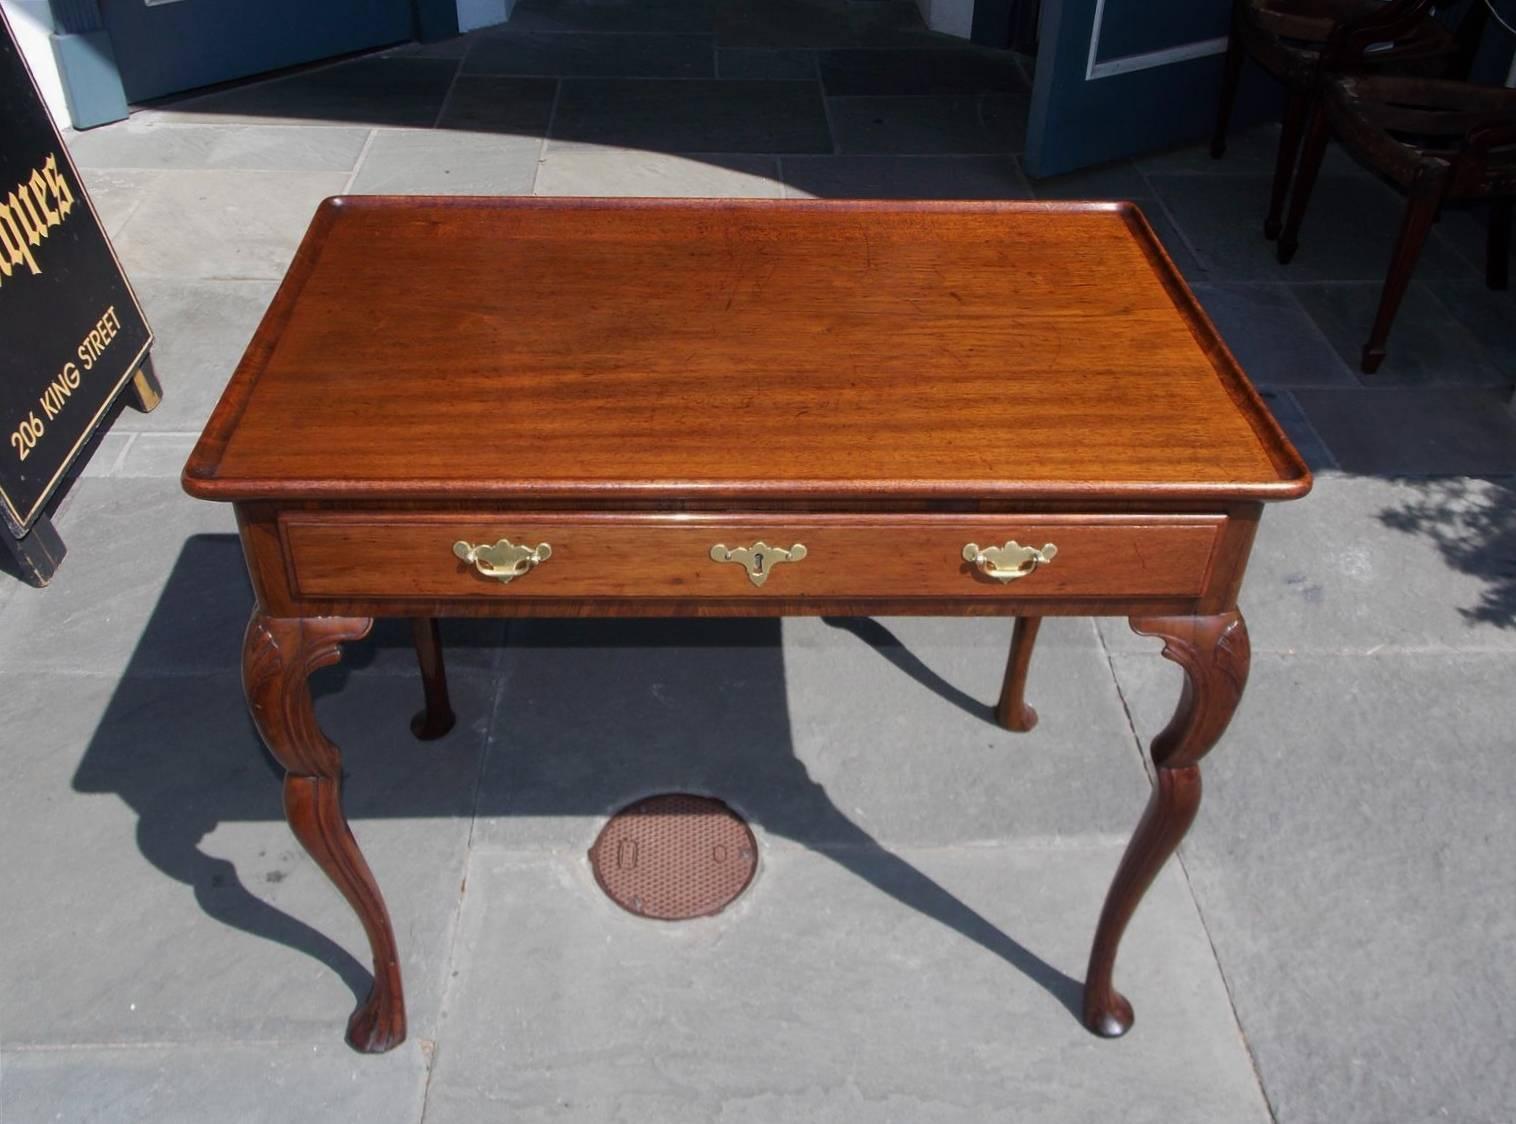 English Chippendale mahogany dish top tea table with a centered single drawer, period brasses, carved shell knees, inset legs , and terminating on four stocking feet, Mid-18th century. Secondary wood consist of oak throughout.